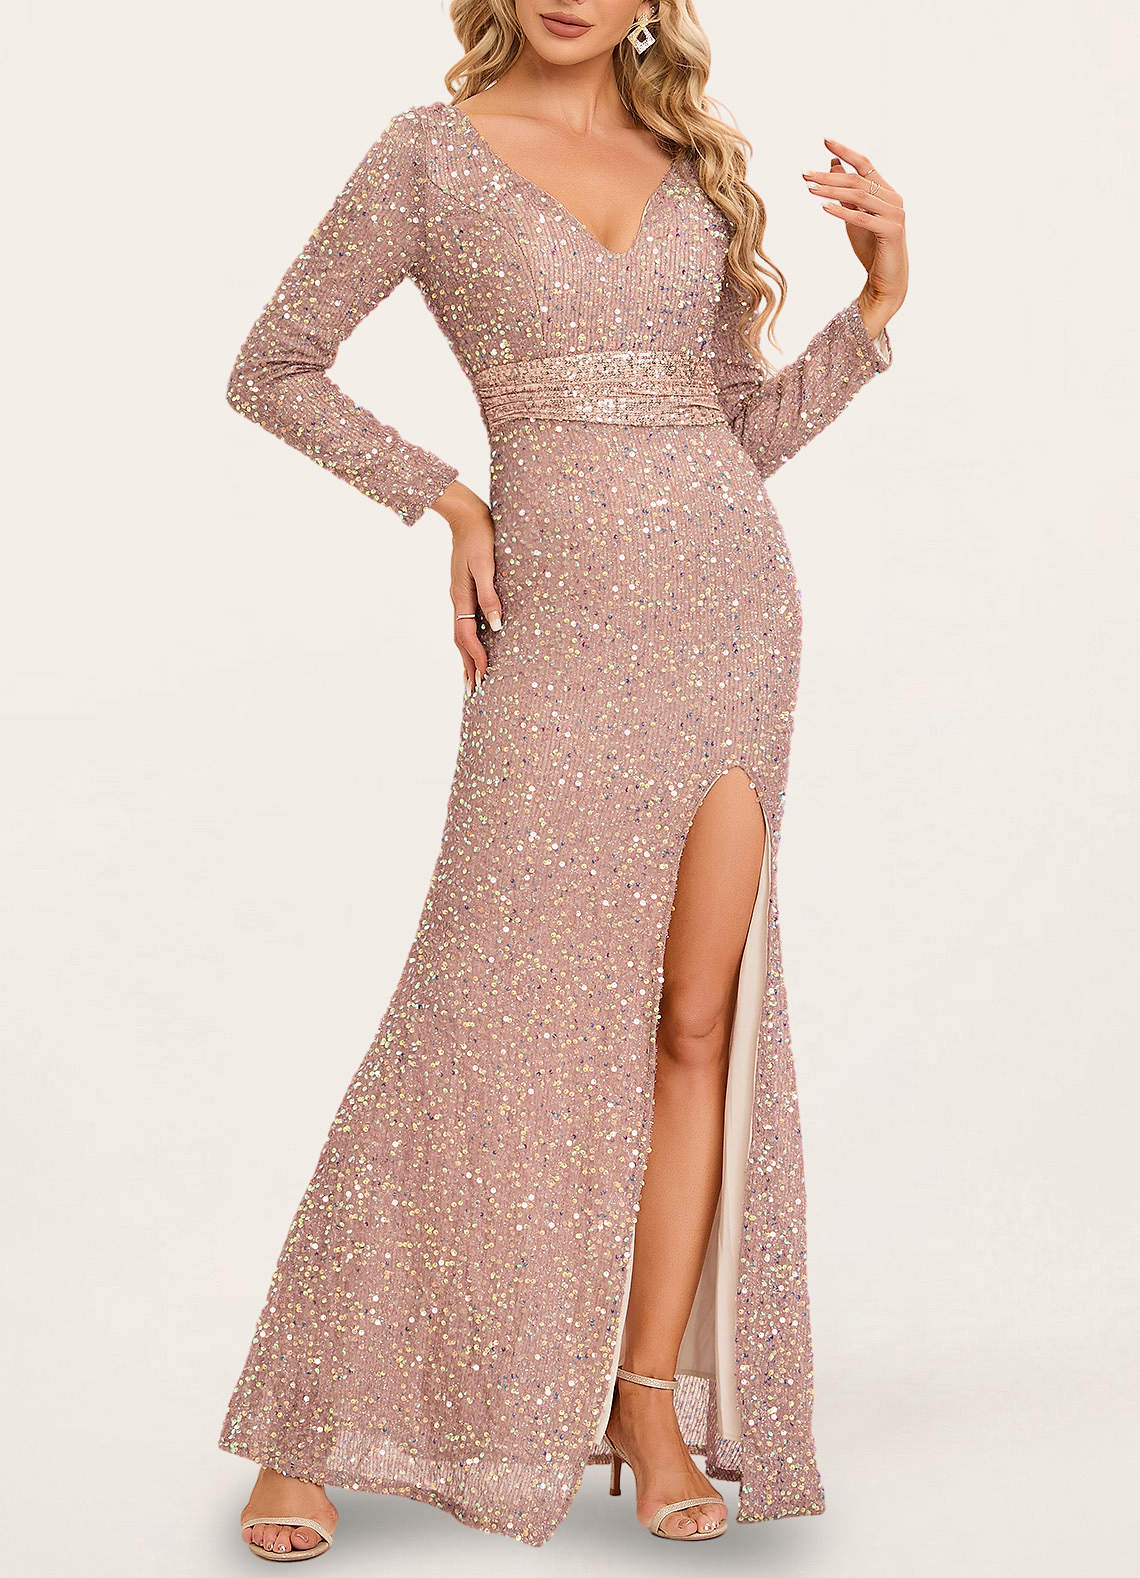 Love Lasts Forever Champagne Sequin Long Sleeve Maxi Dress image1